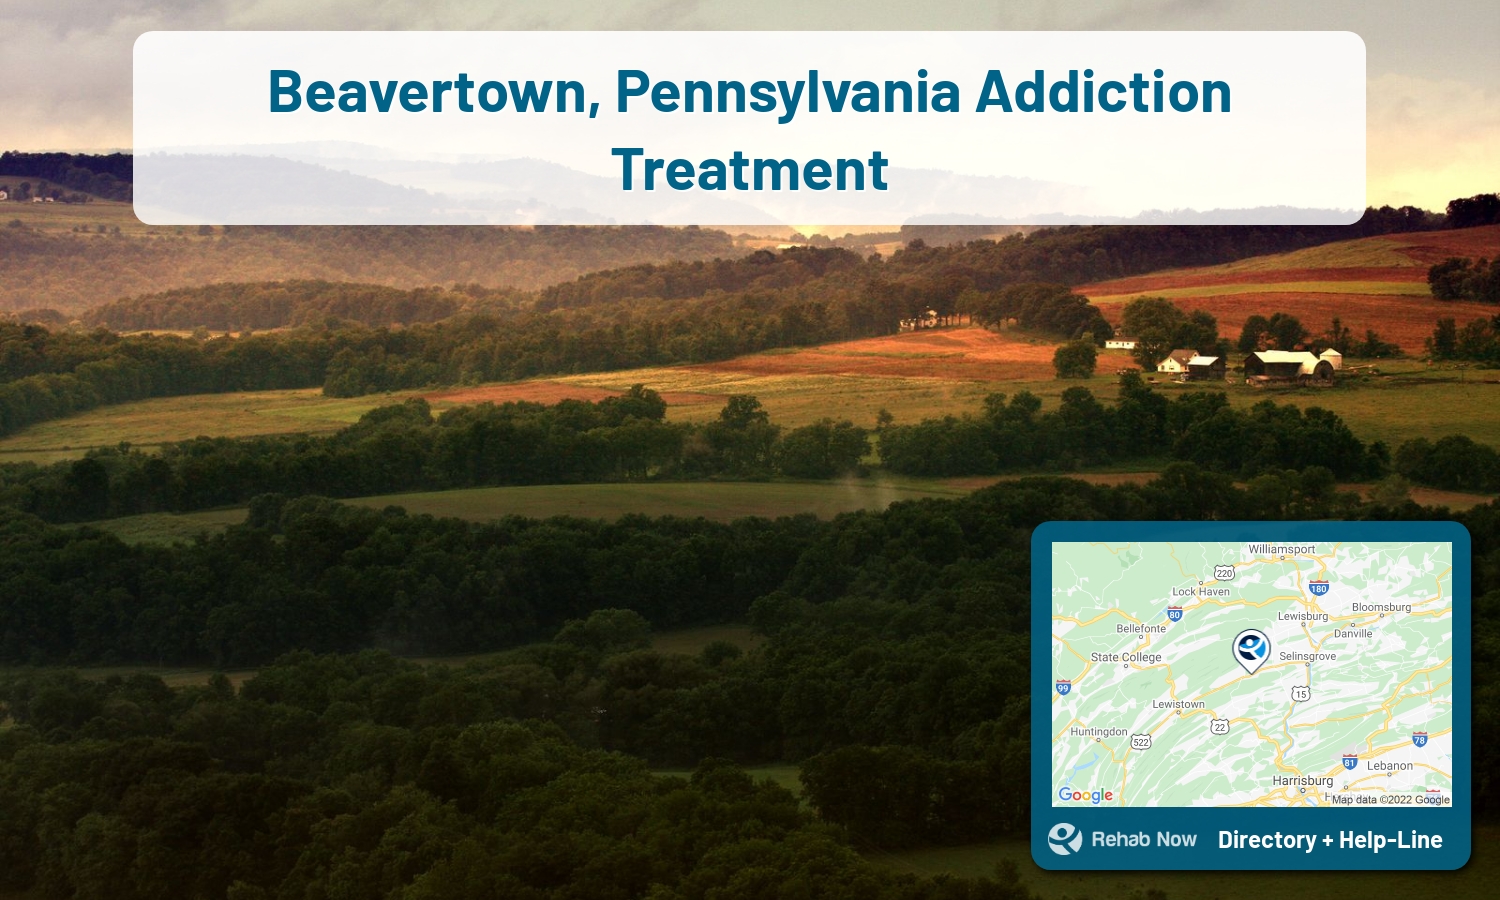 Beavertown, PA Treatment Centers. Find drug rehab in Beavertown, Pennsylvania, or detox and treatment programs. Get the right help now!